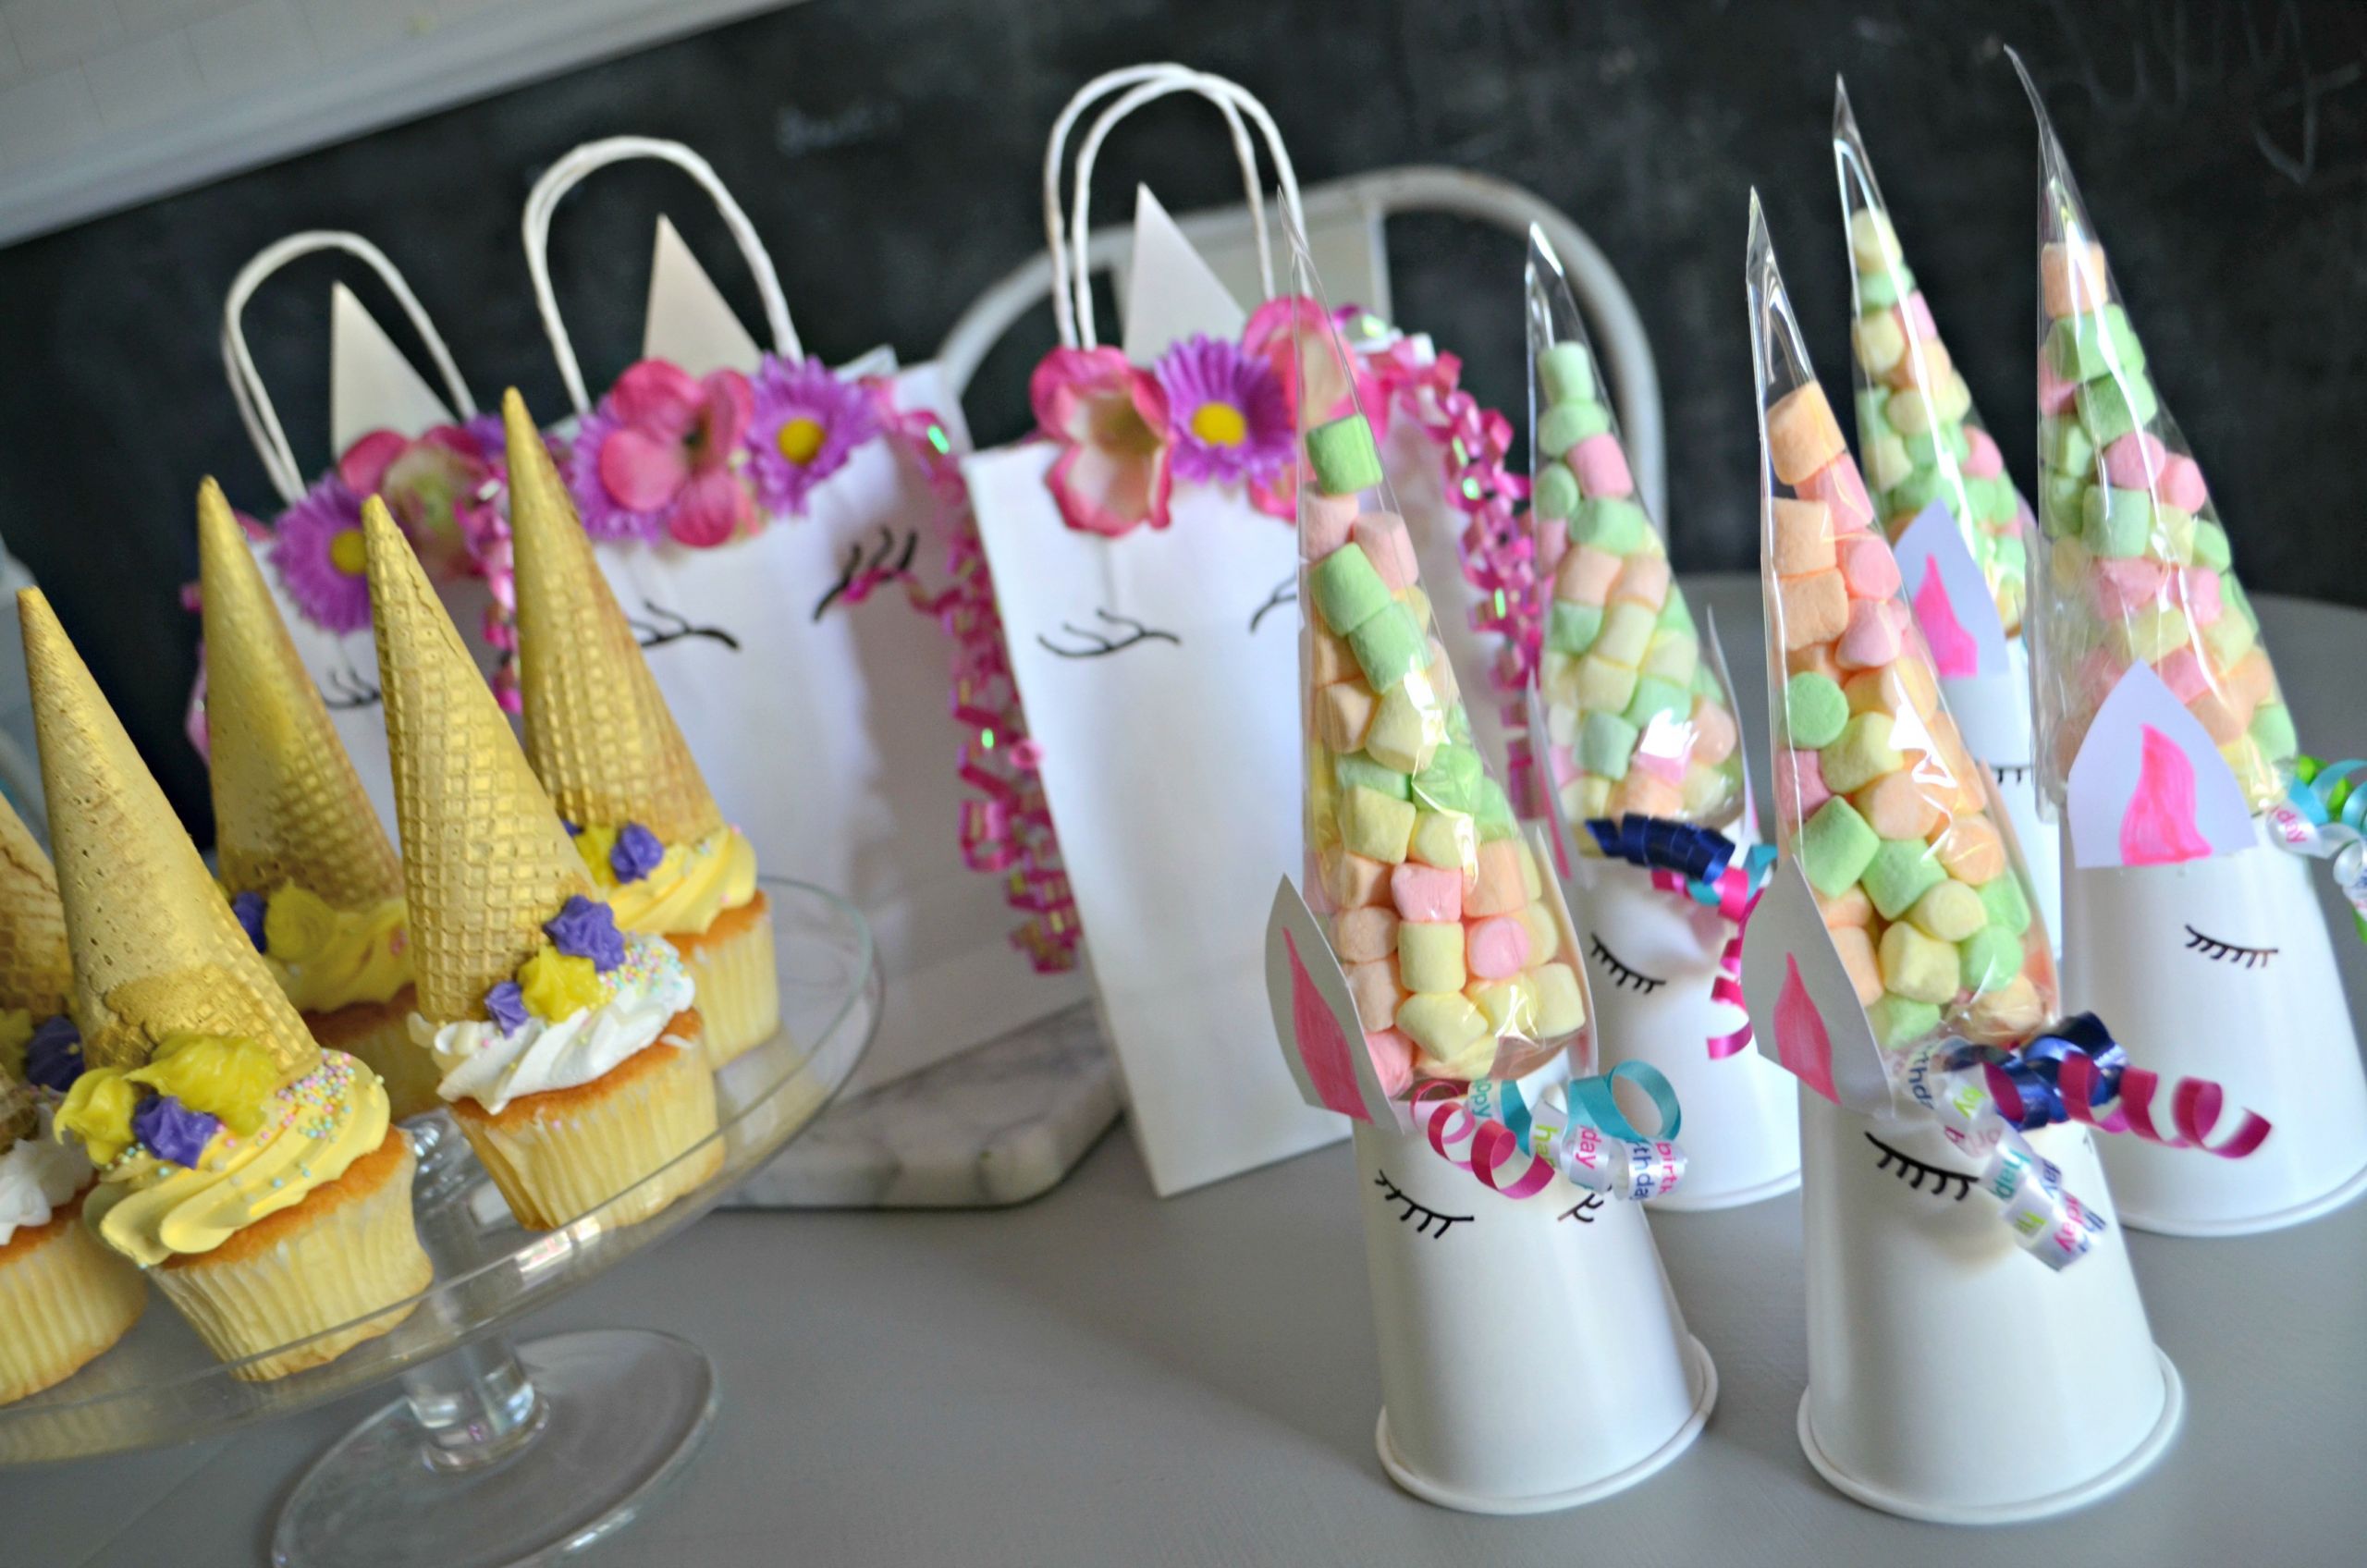 Unicorn Party Food Ideas Ponytails
 Make These 3 Frugal Cute and Easy DIY Unicorn Birthday